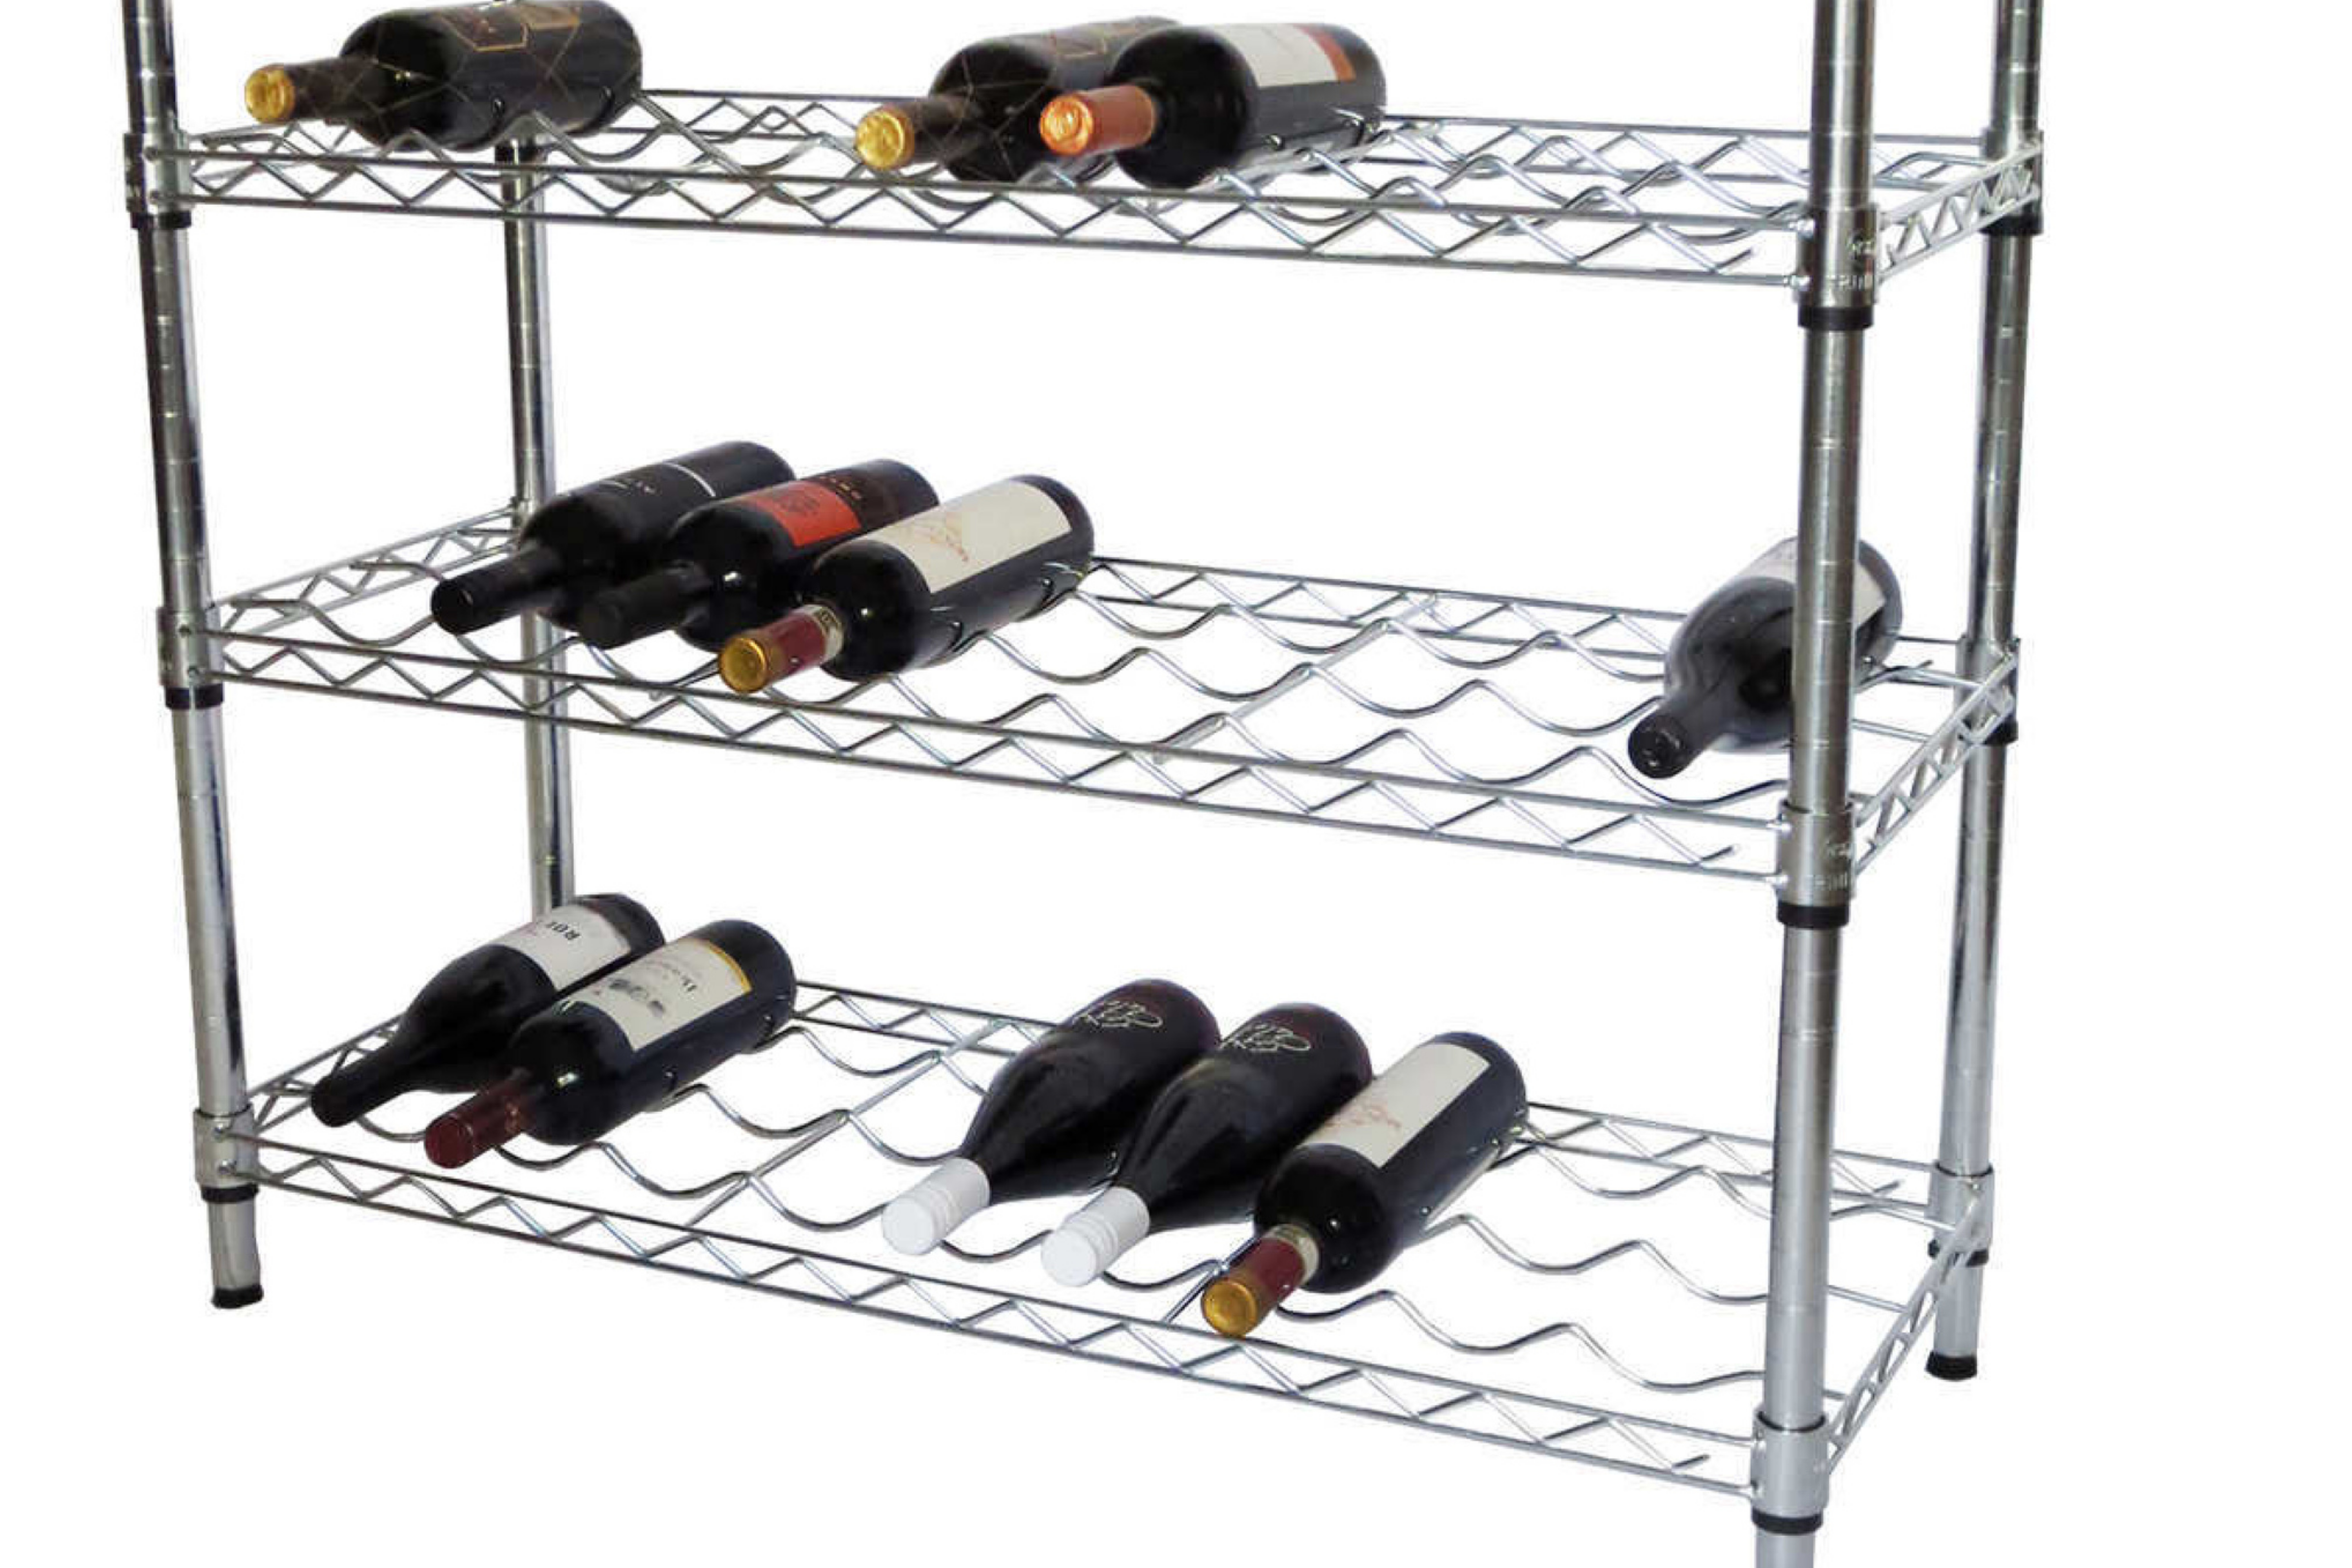 7. Prepare a Unique Wine Rack From Your Car’s Grille